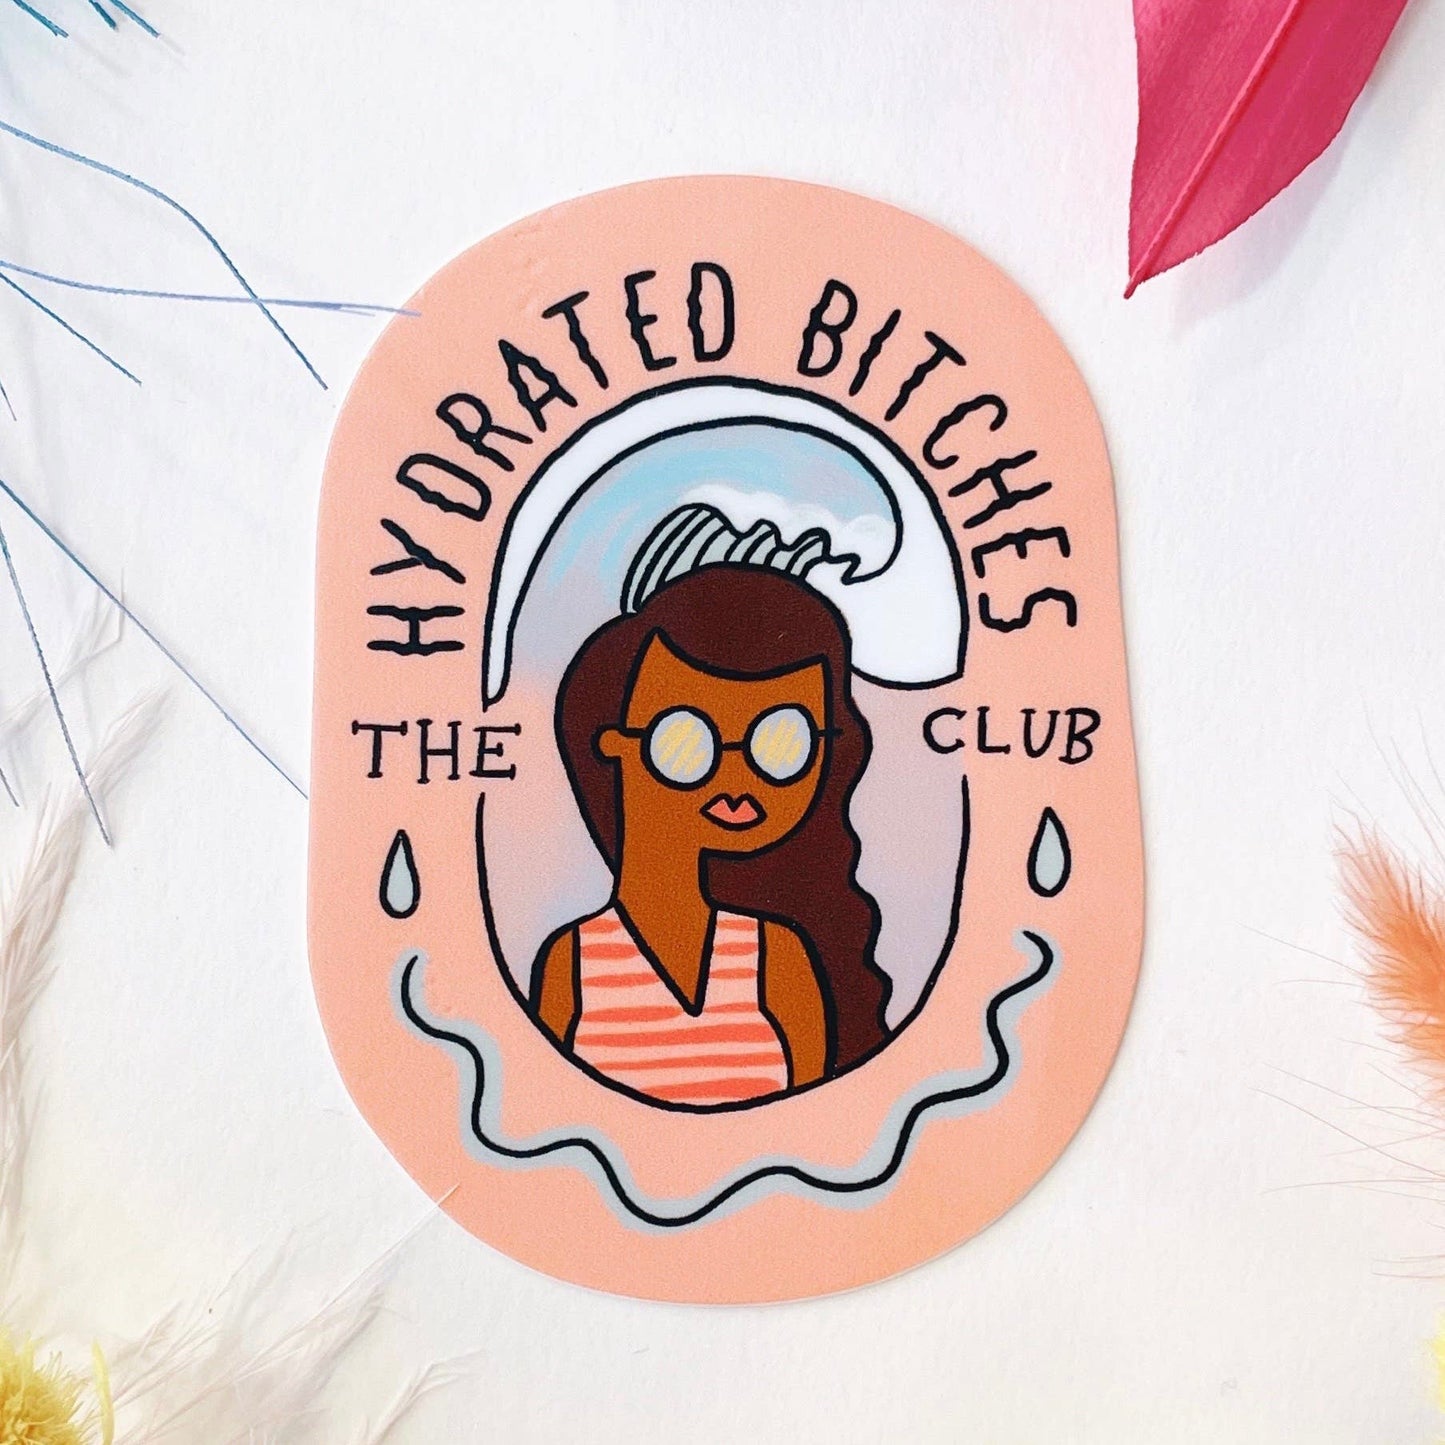 The Hydrated Bitches Club Sticker